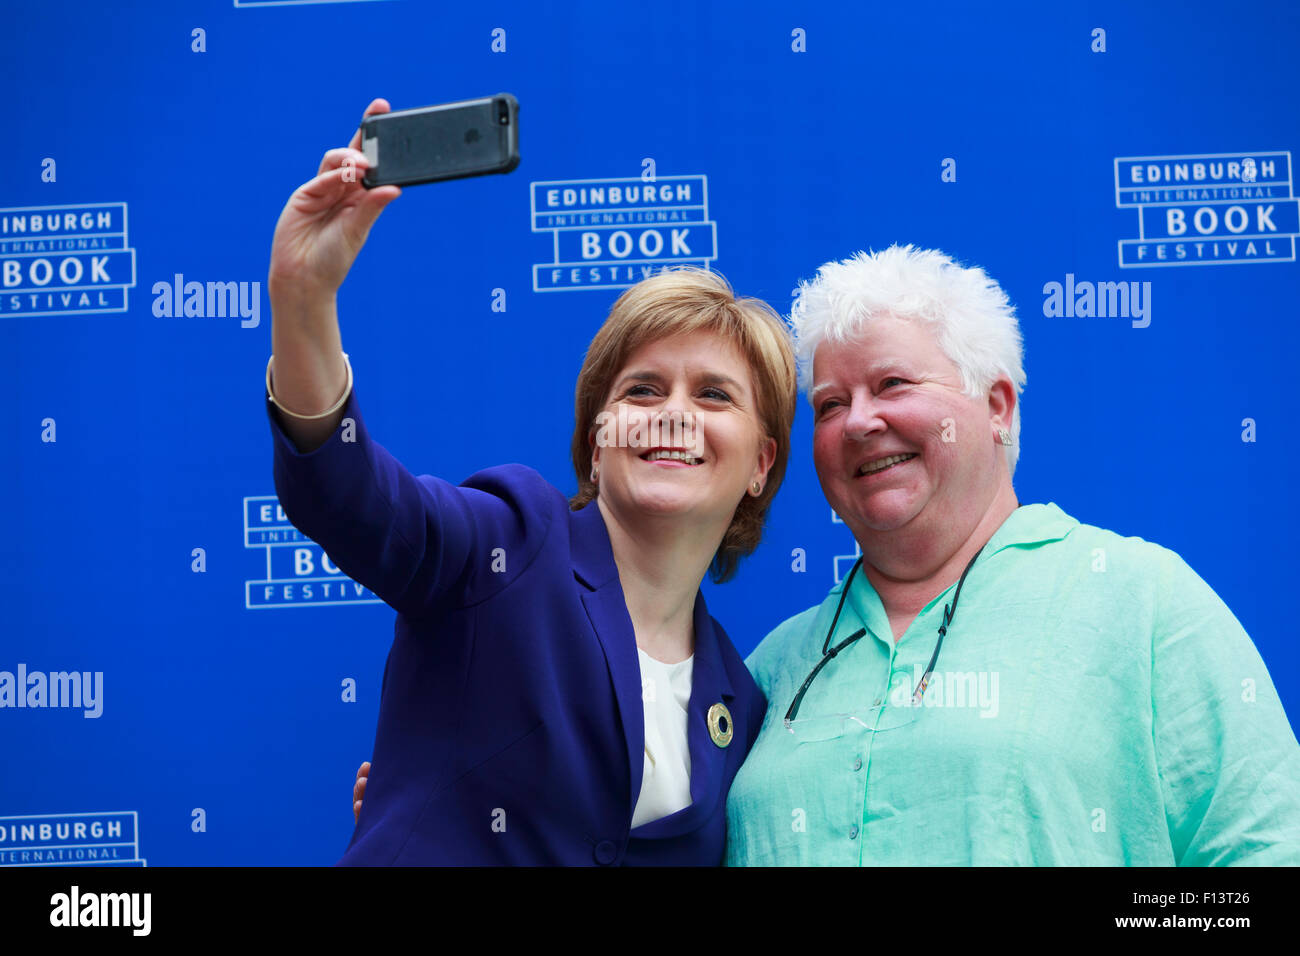 Edinburgh. UK. 26 August, 2015. First Minister appoinment with the Queen of Crime in Edinburgh International Book Festival. Val McDermid bestselling novels that have sold over 11 millions copies to discuss Splinter the Silence and Stranded. Pako Mera/Alamy Live News. Stock Photo